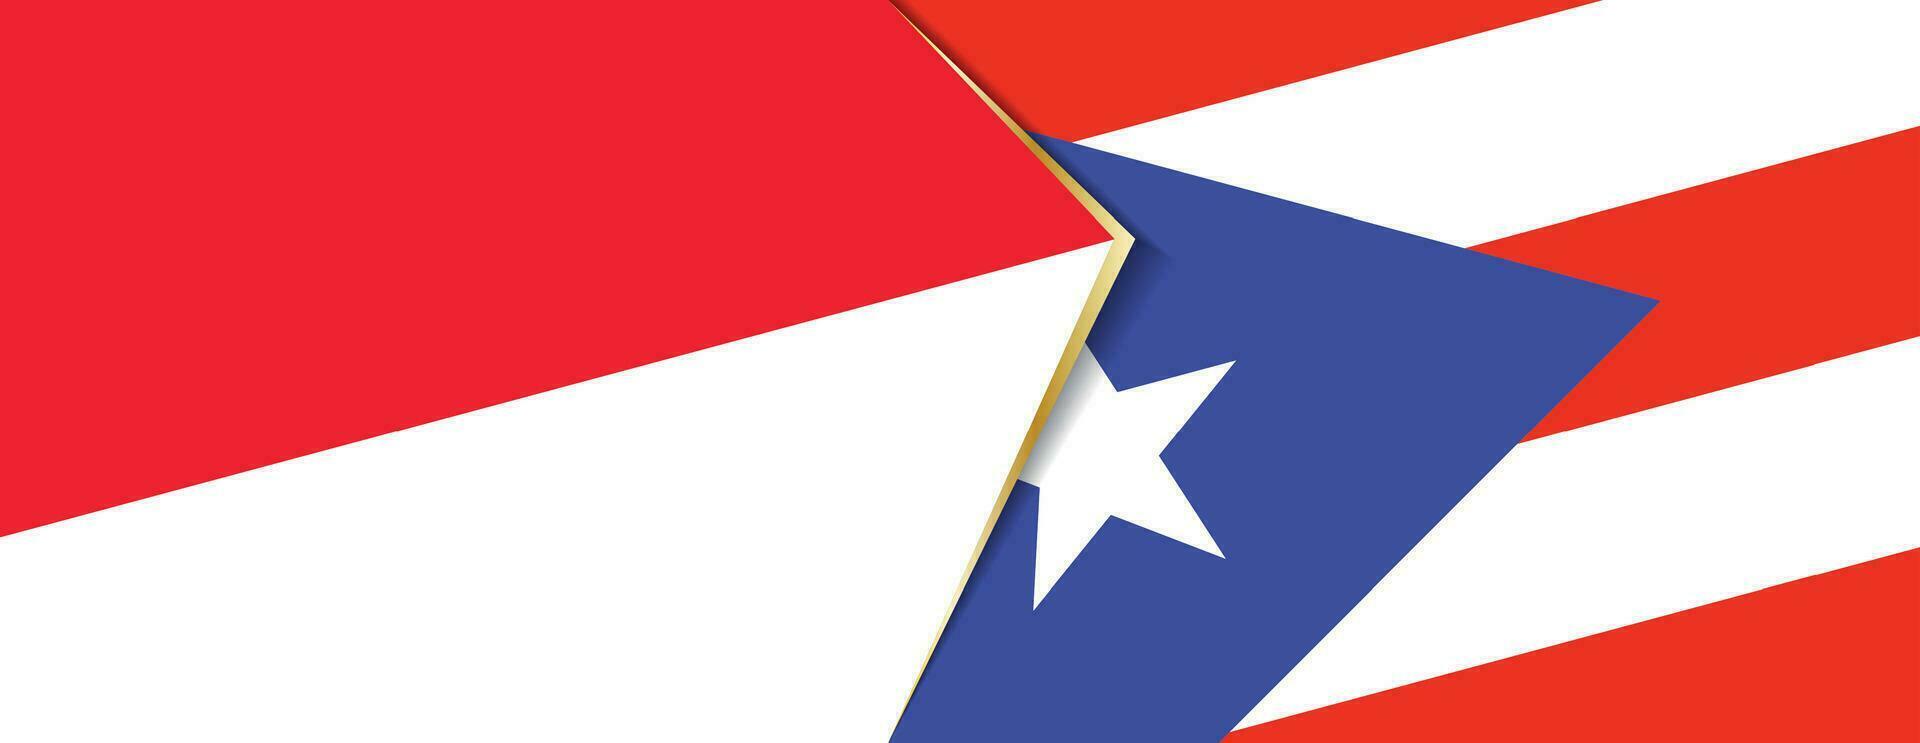 Indonesia and Puerto Rico flags, two vector flags.